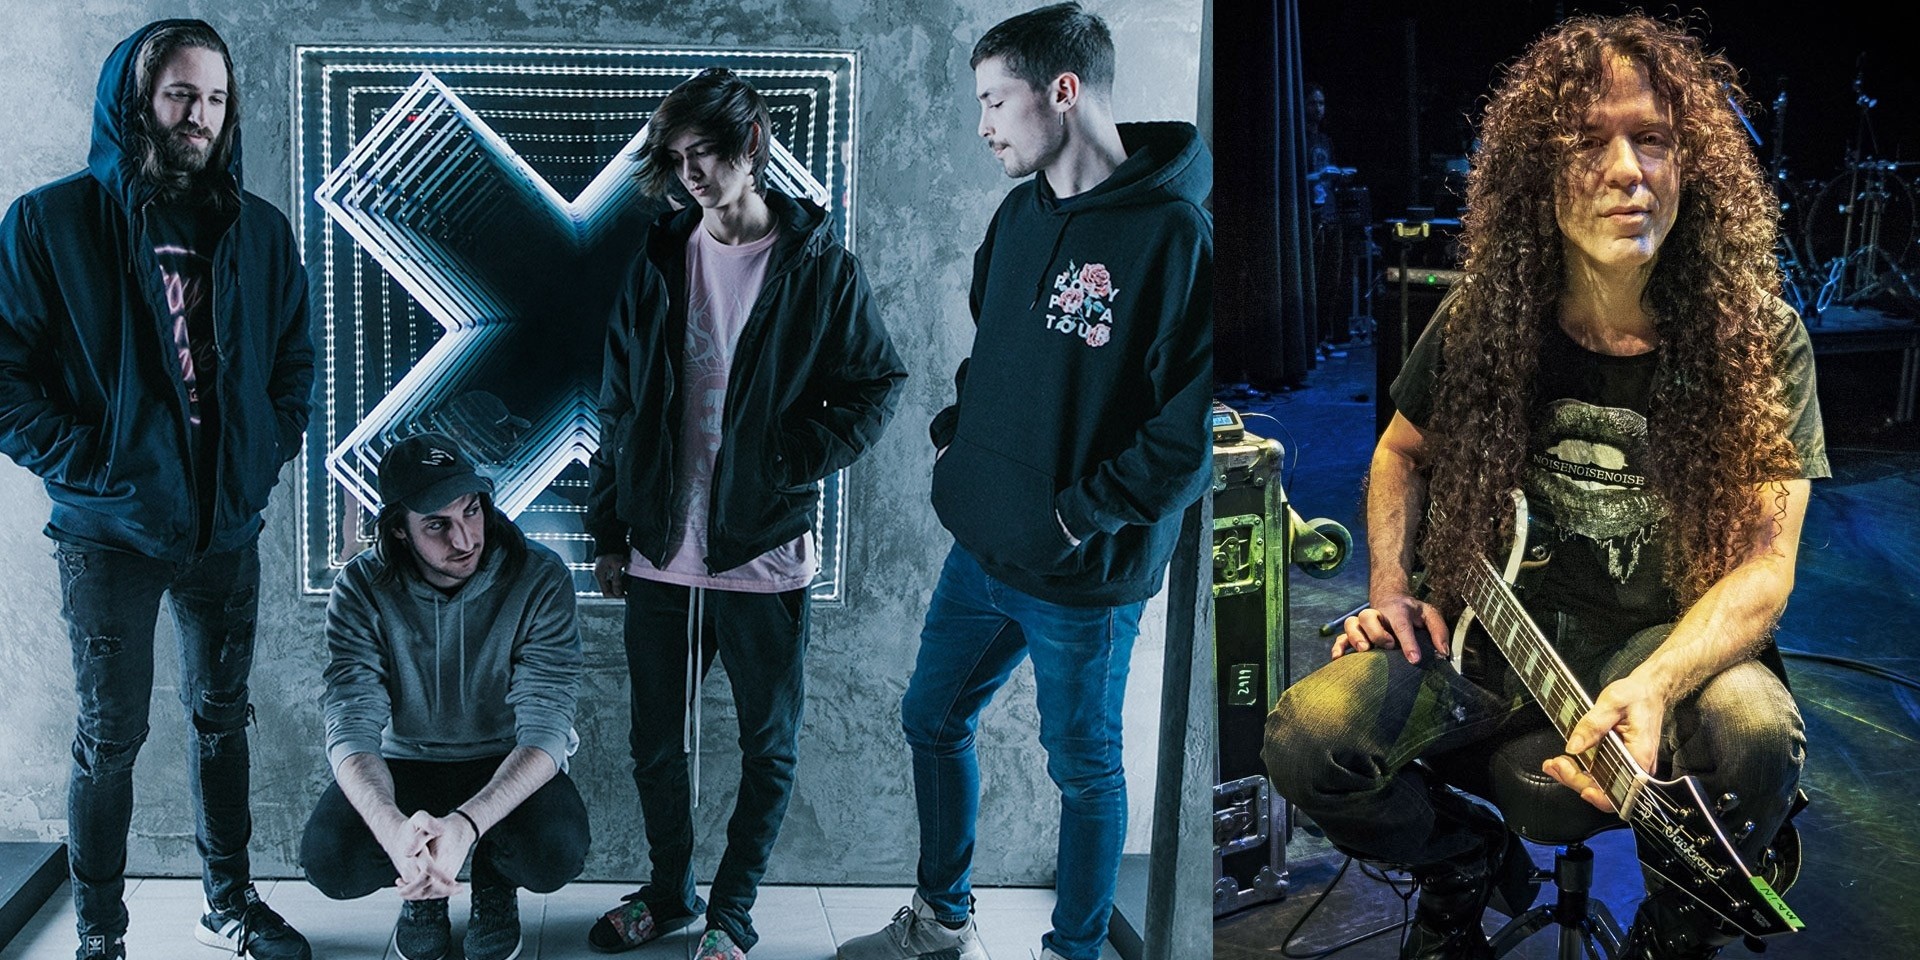 Polyphia & Marty Friedman to hold one-night concert in Manila